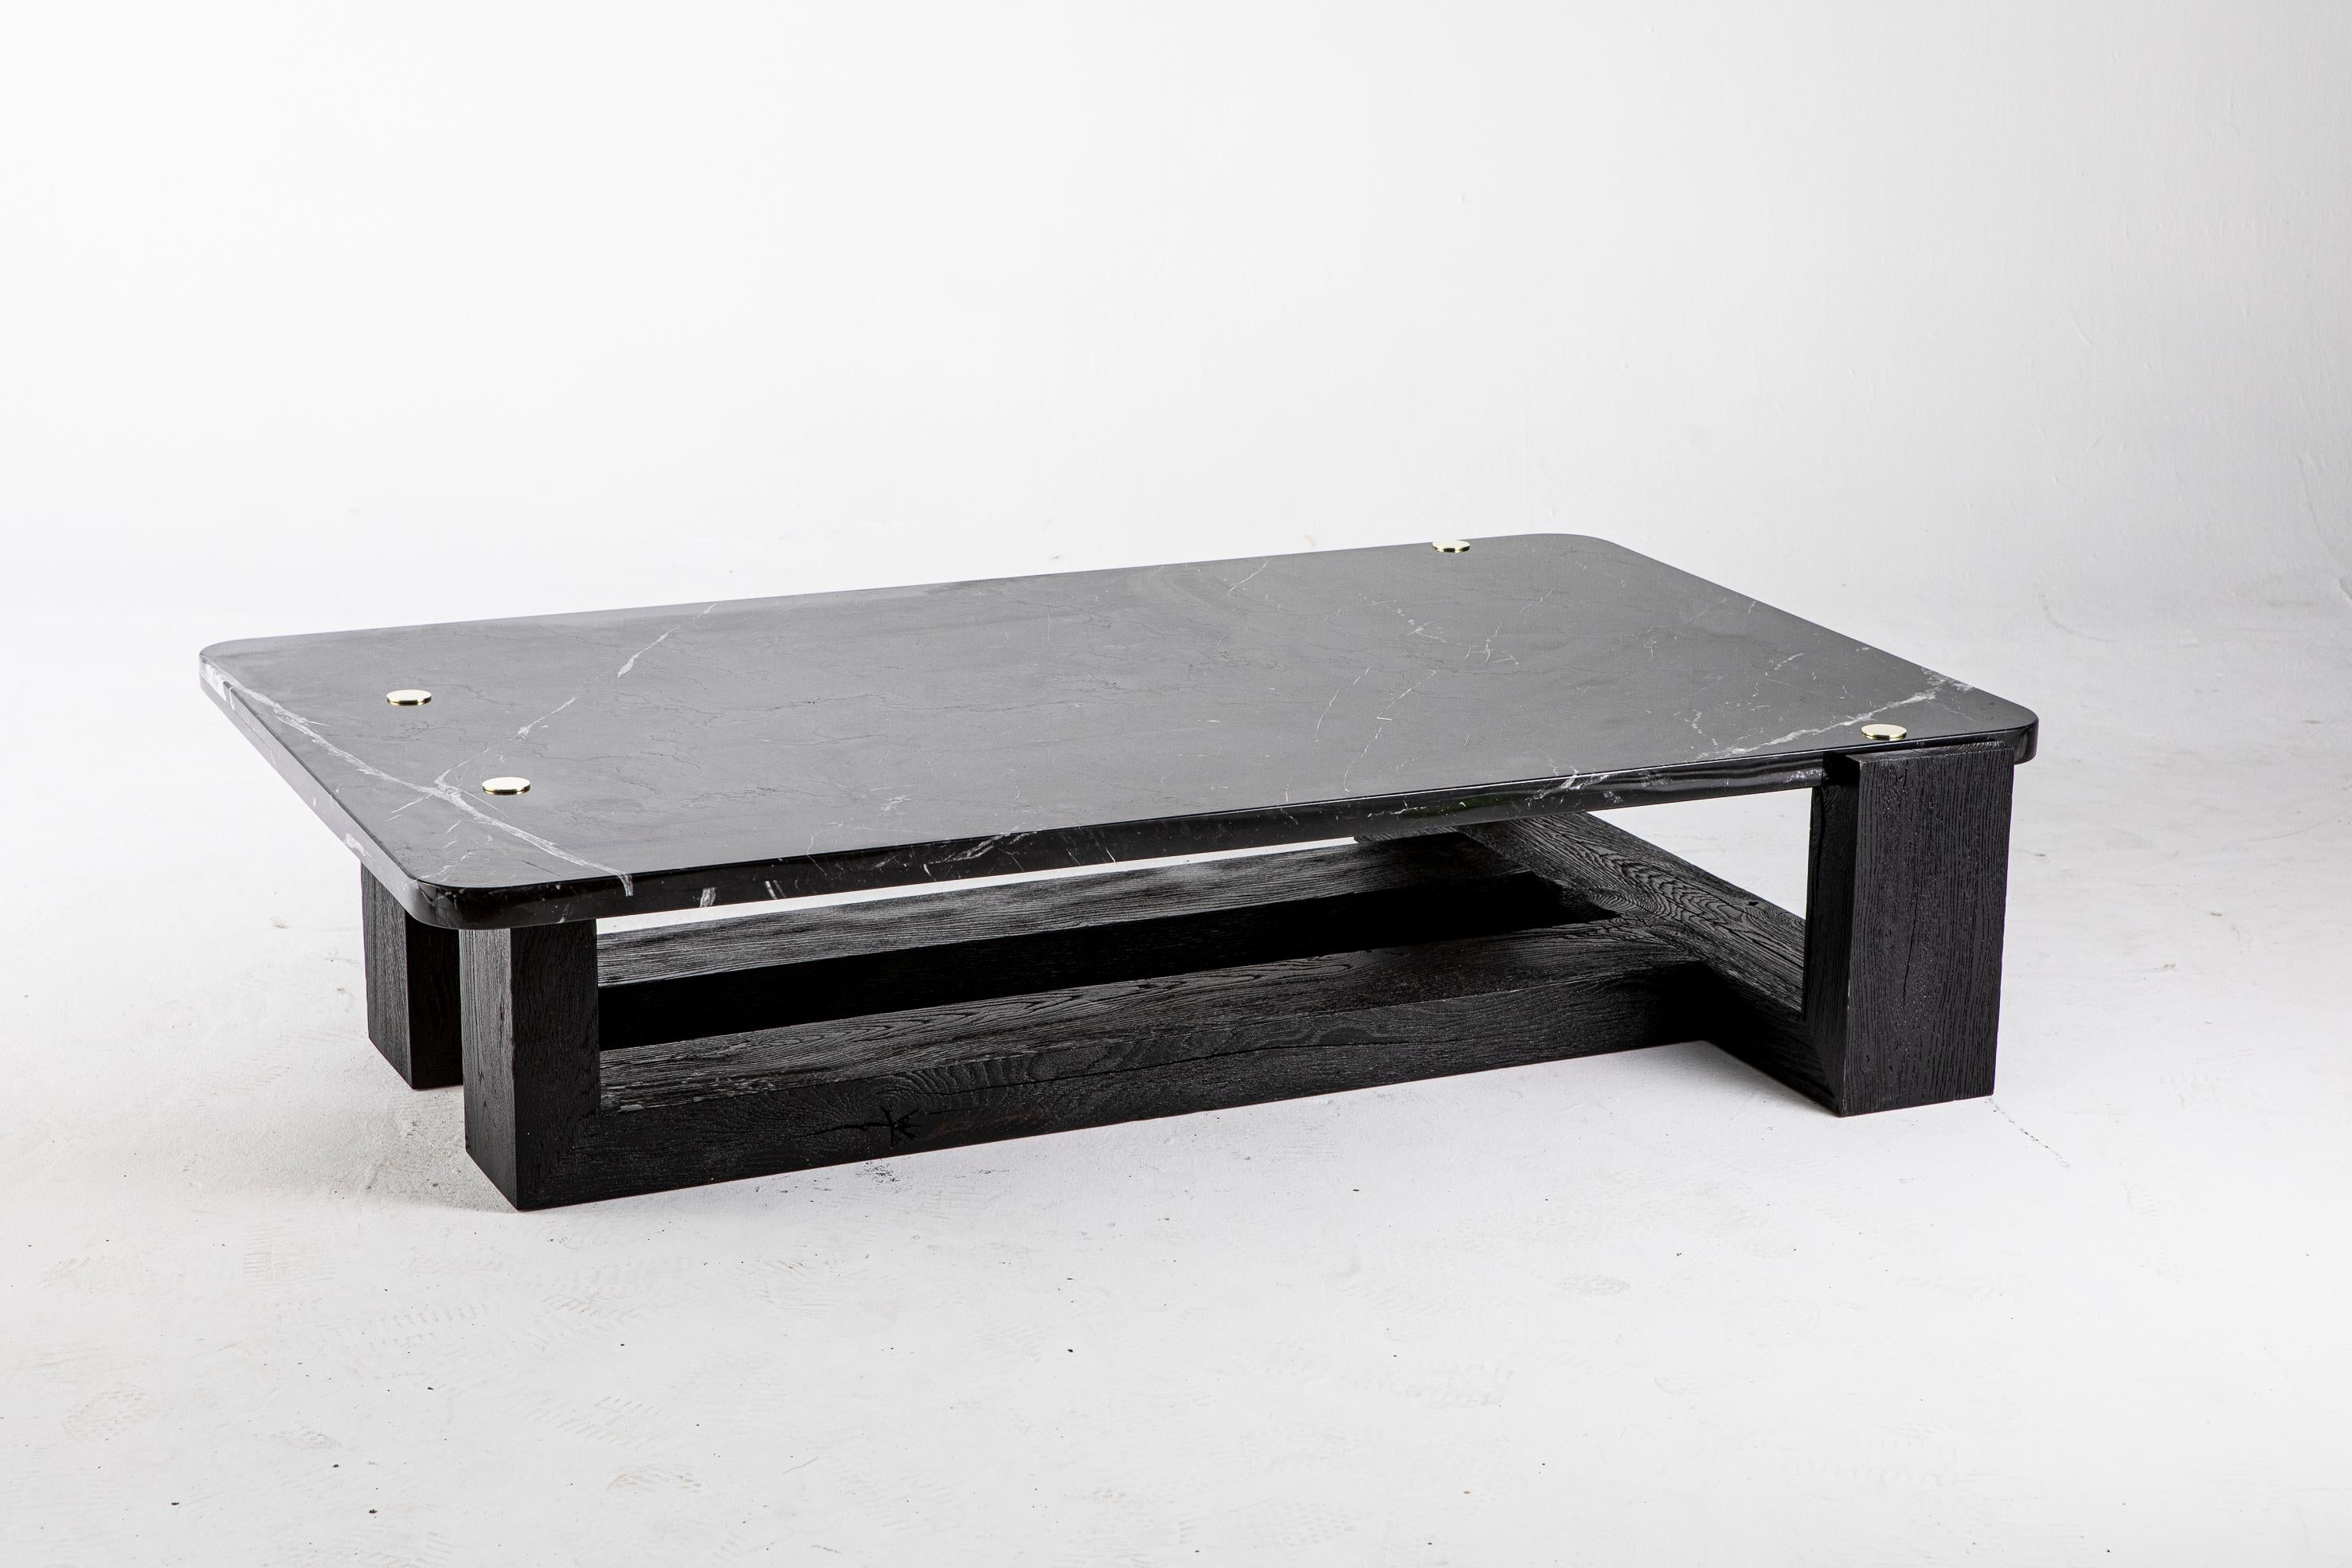 Jewel coffee table by Egg Designs
Dimensions: 170 L X 110D X 37 H cm
Materials: Solid Blackened Oak Cant, Brass, Nero Maquena Marble

Founded by South Africans and life partners, Greg and Roche Dry - Egg is a unique perspective in contemporary